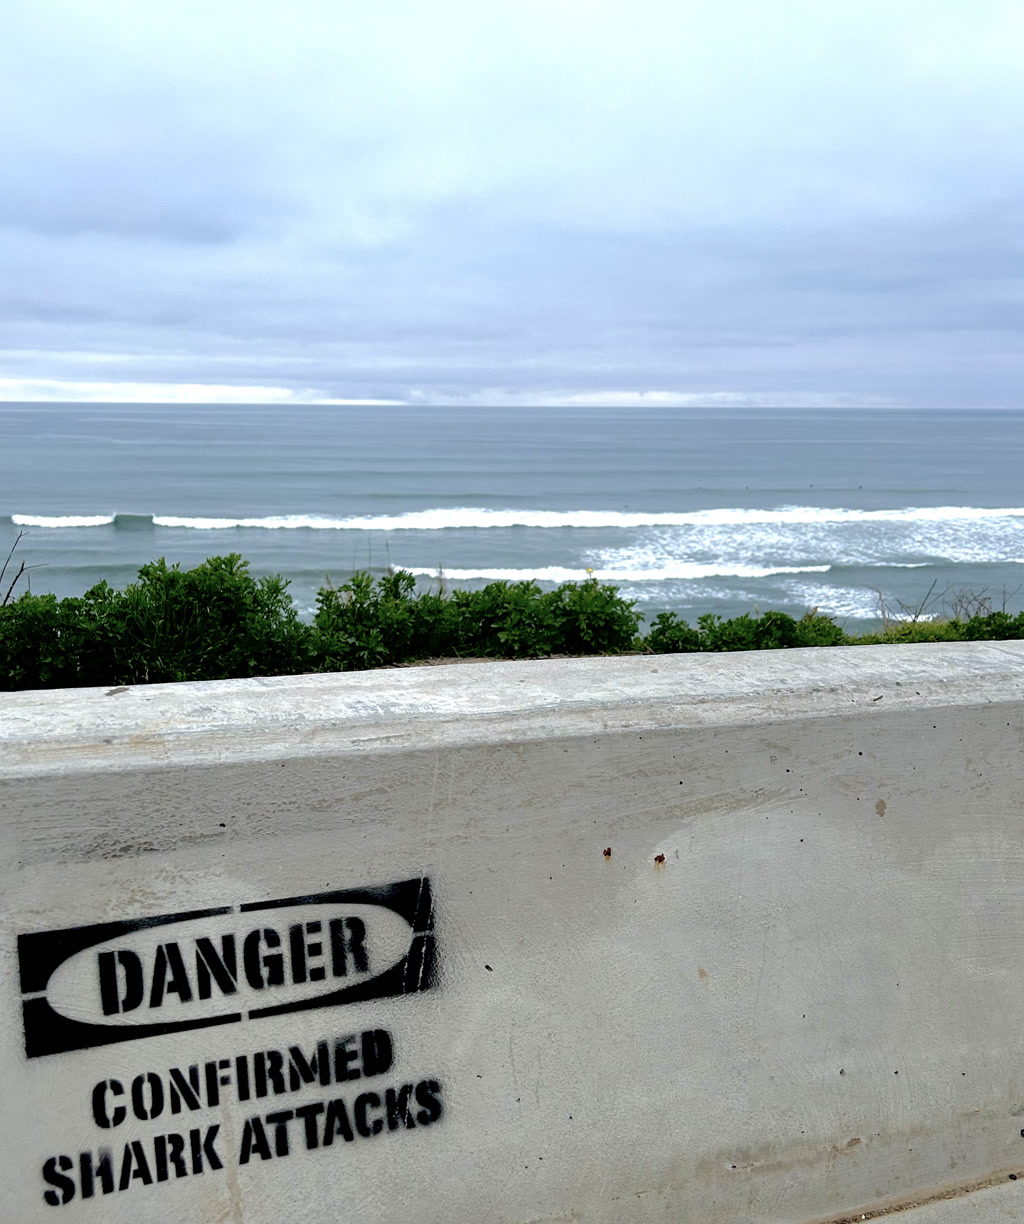 The scene consists of an overcast sky above a rough sea with visible waves breaking and reaching the shore. In the foreground, there is a low concrete barrier facing the sea, with a black stencil text warning embossed on its surface. Surrounding the area are some shrubs and plants adding a touch of greenery to the otherwise gray setting.